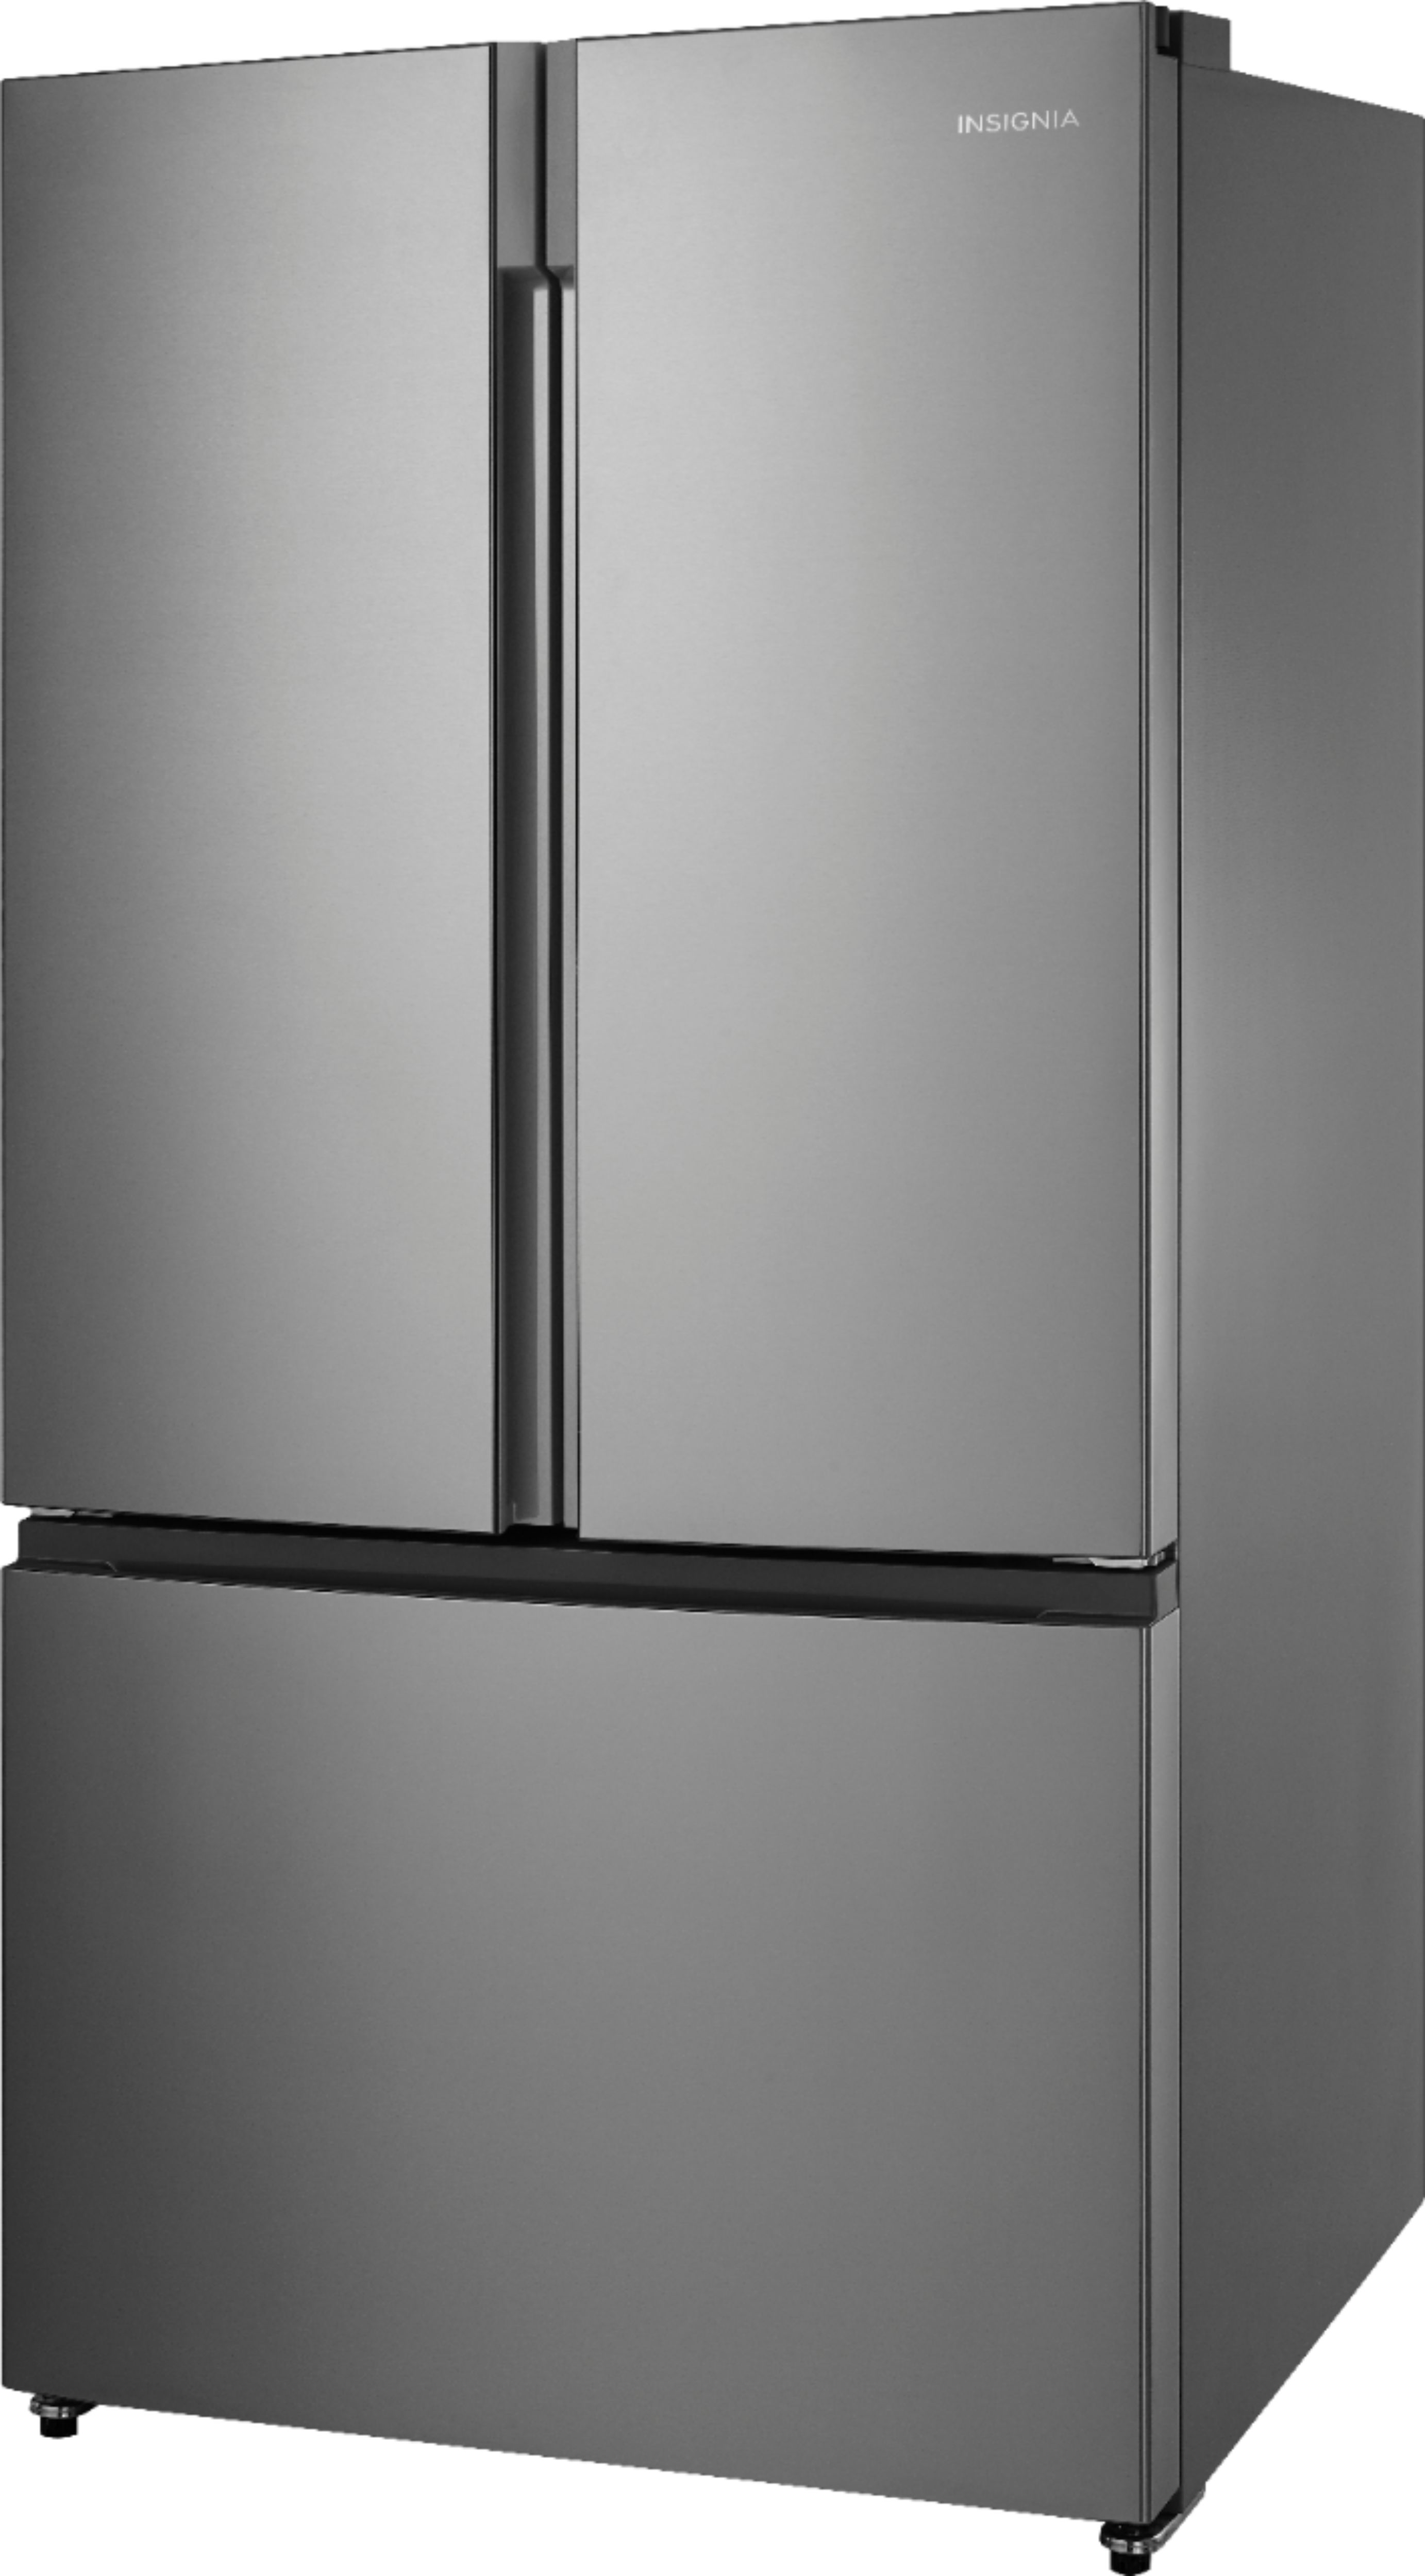 Left View: Insignia™ - 26.6 Cu. Ft. French Door Refrigerator - Stainless steel